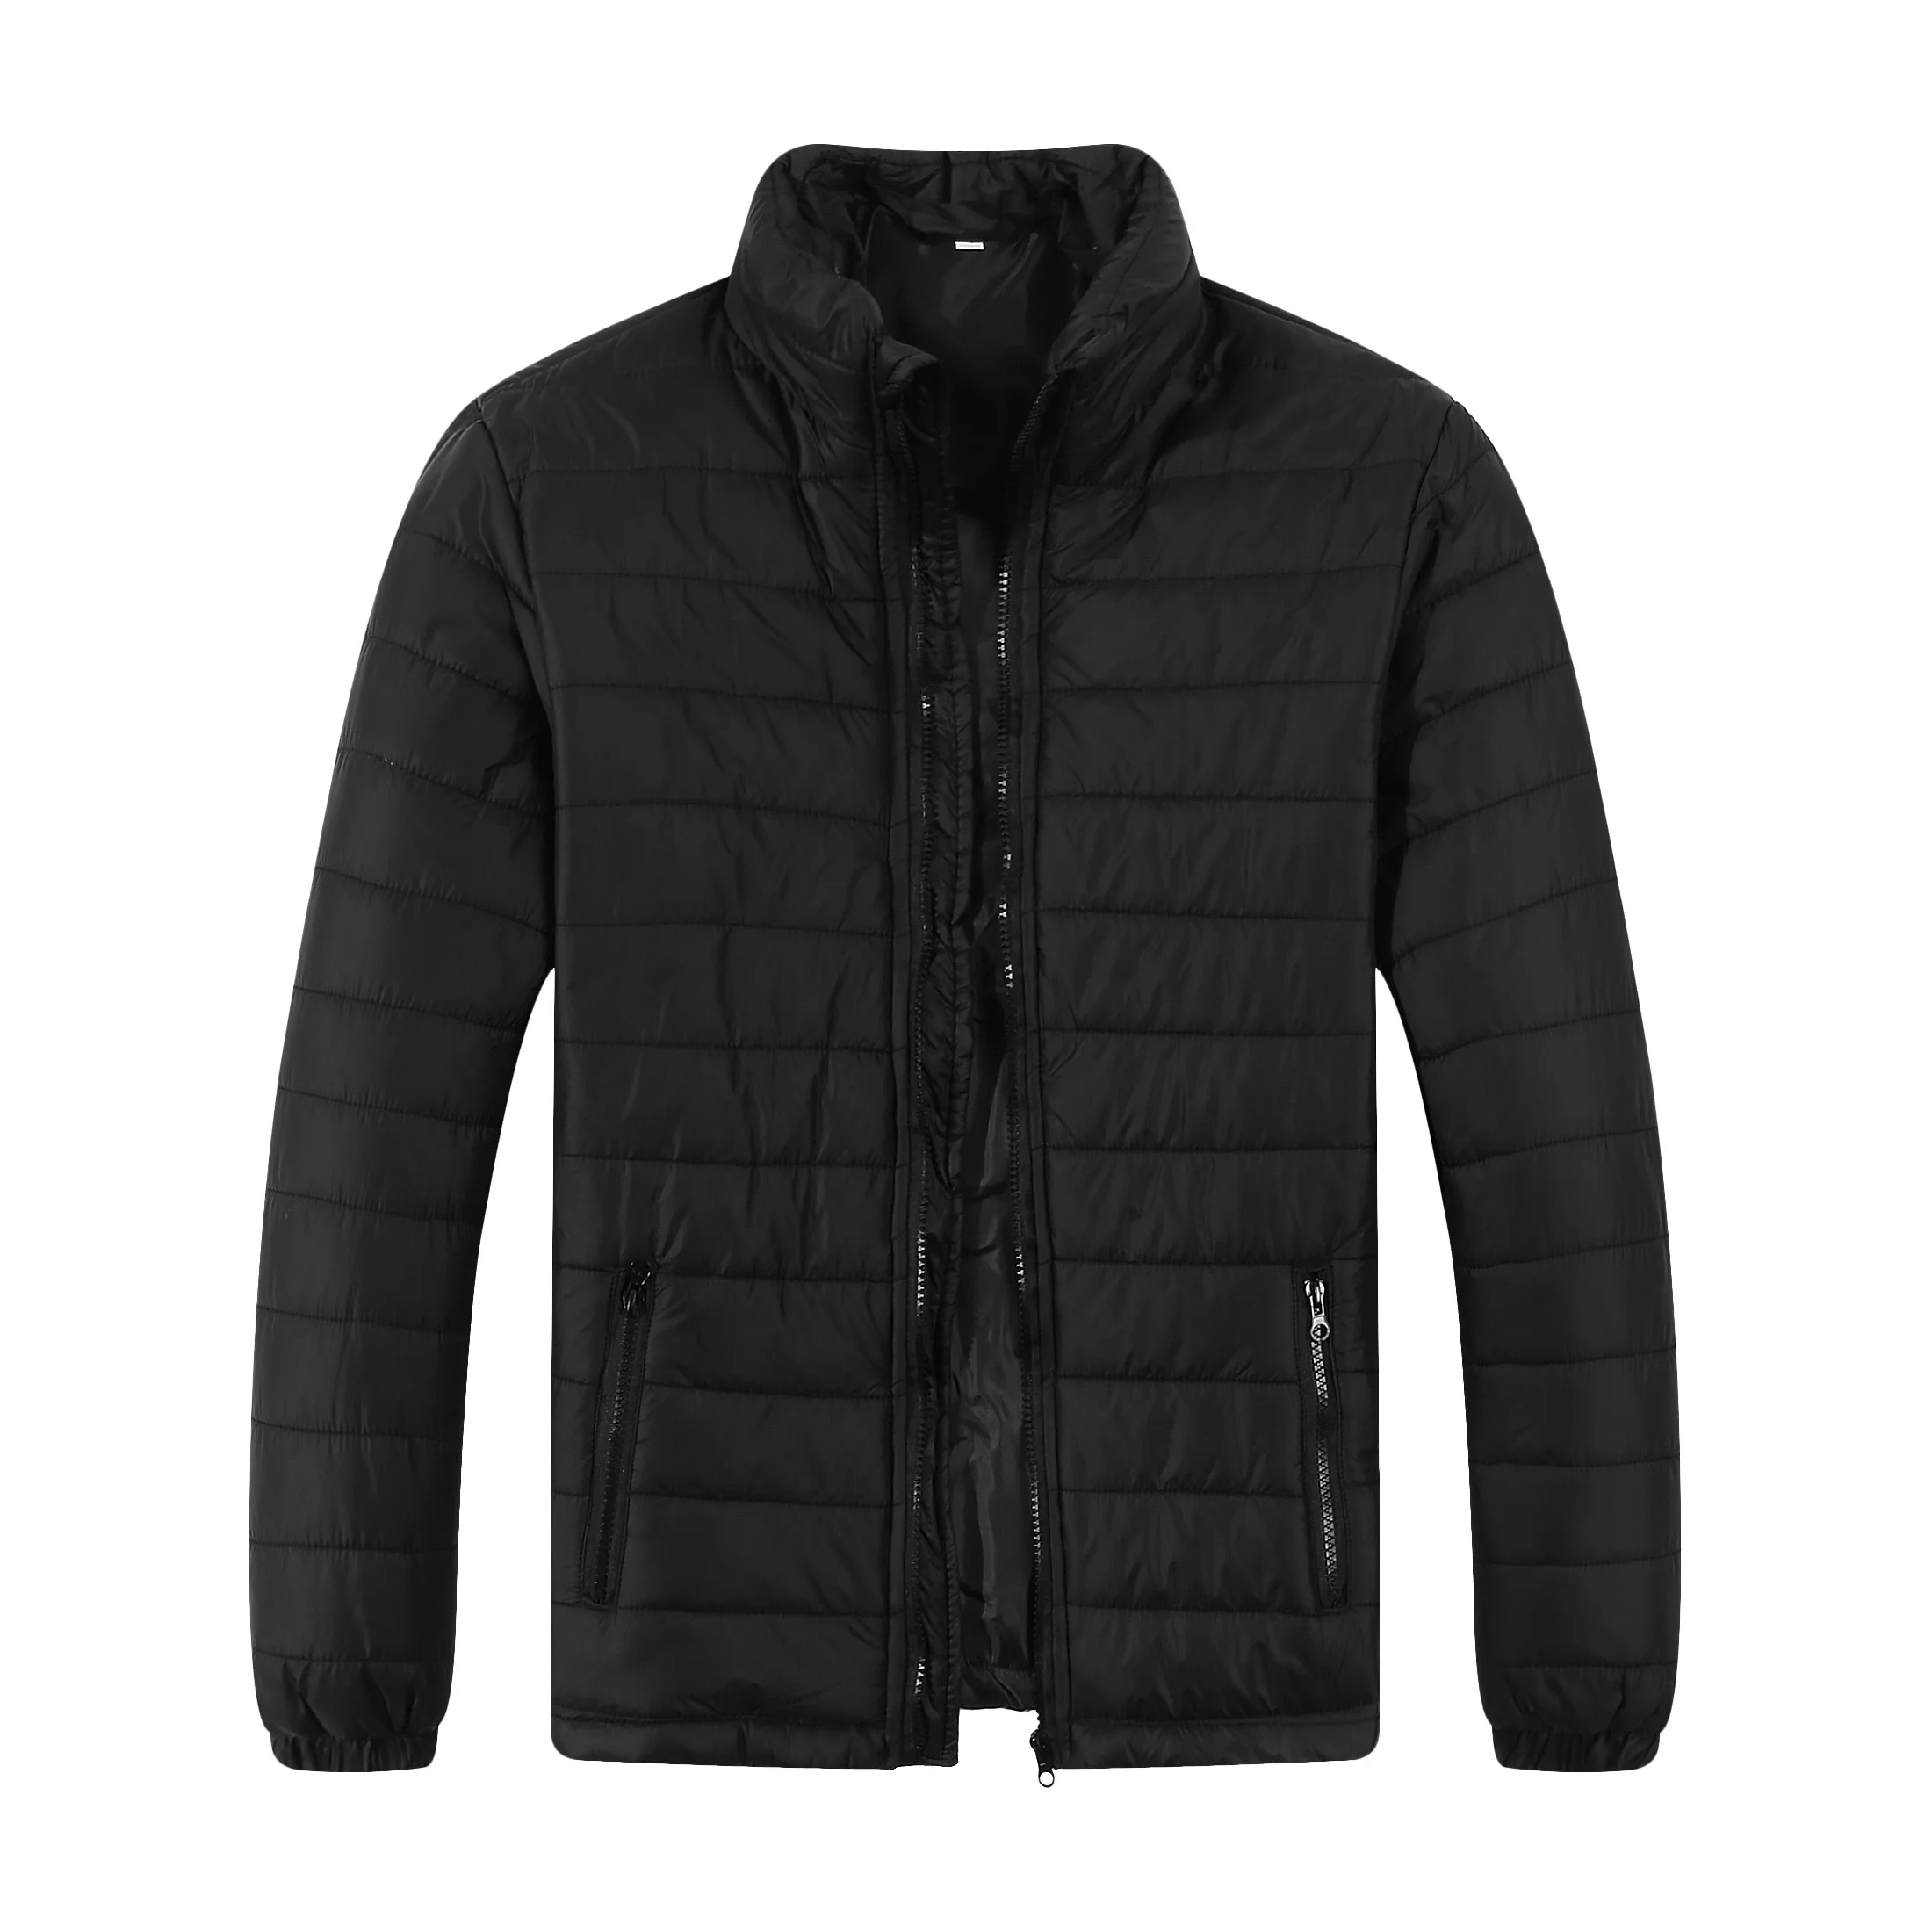 New down jacket for men's fashion jacket, ultra-light and thin, warm and slim fitting jacket, down jacket for men's jacket